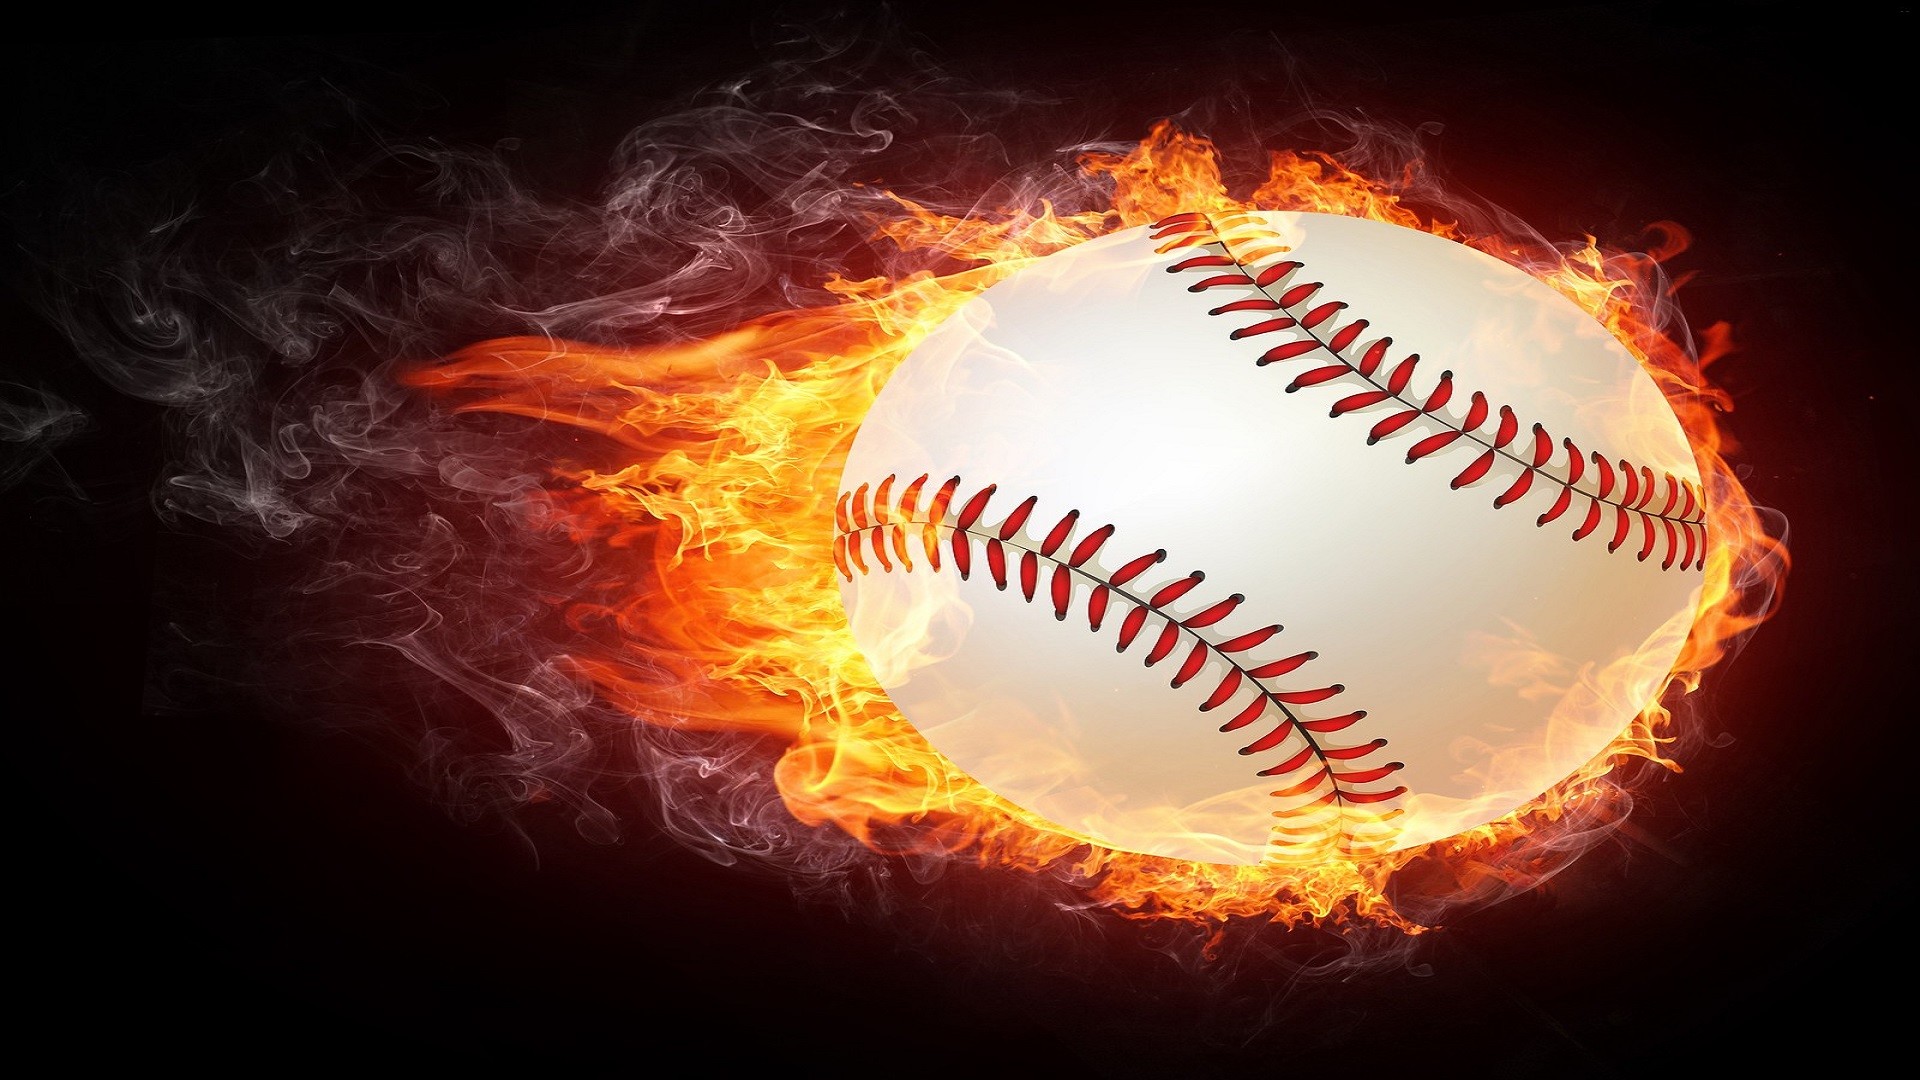 1920x1080 Fire-Baseball-Images-free-hd-wallpapers-for-desktop